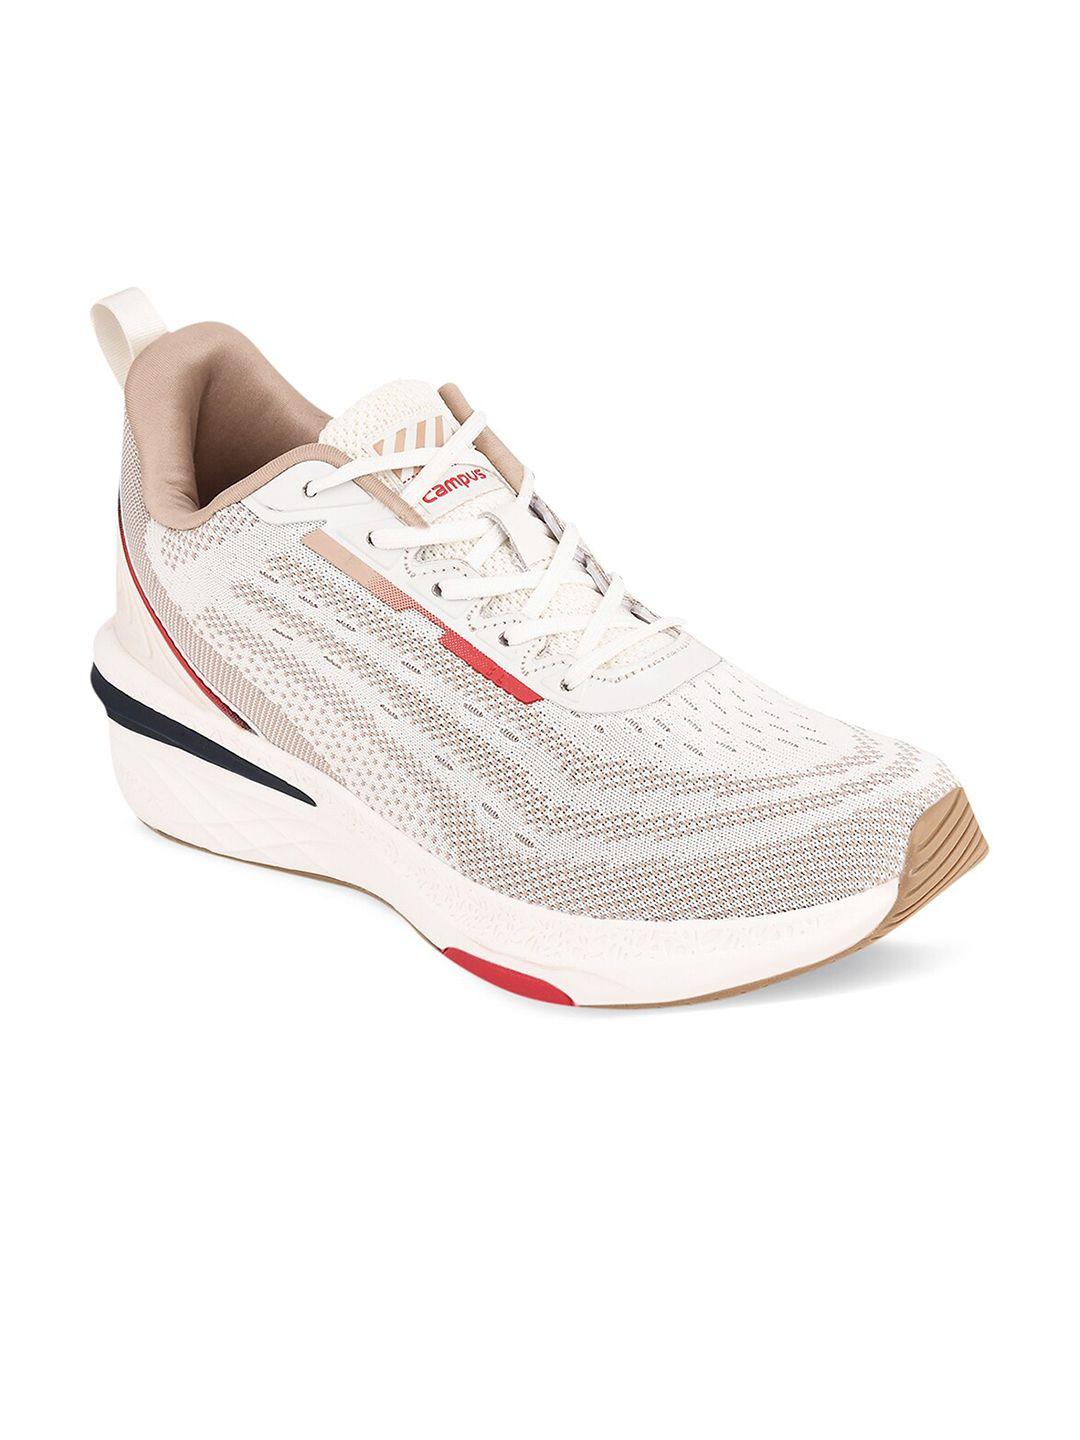 campus men off white mesh running  sports shoes